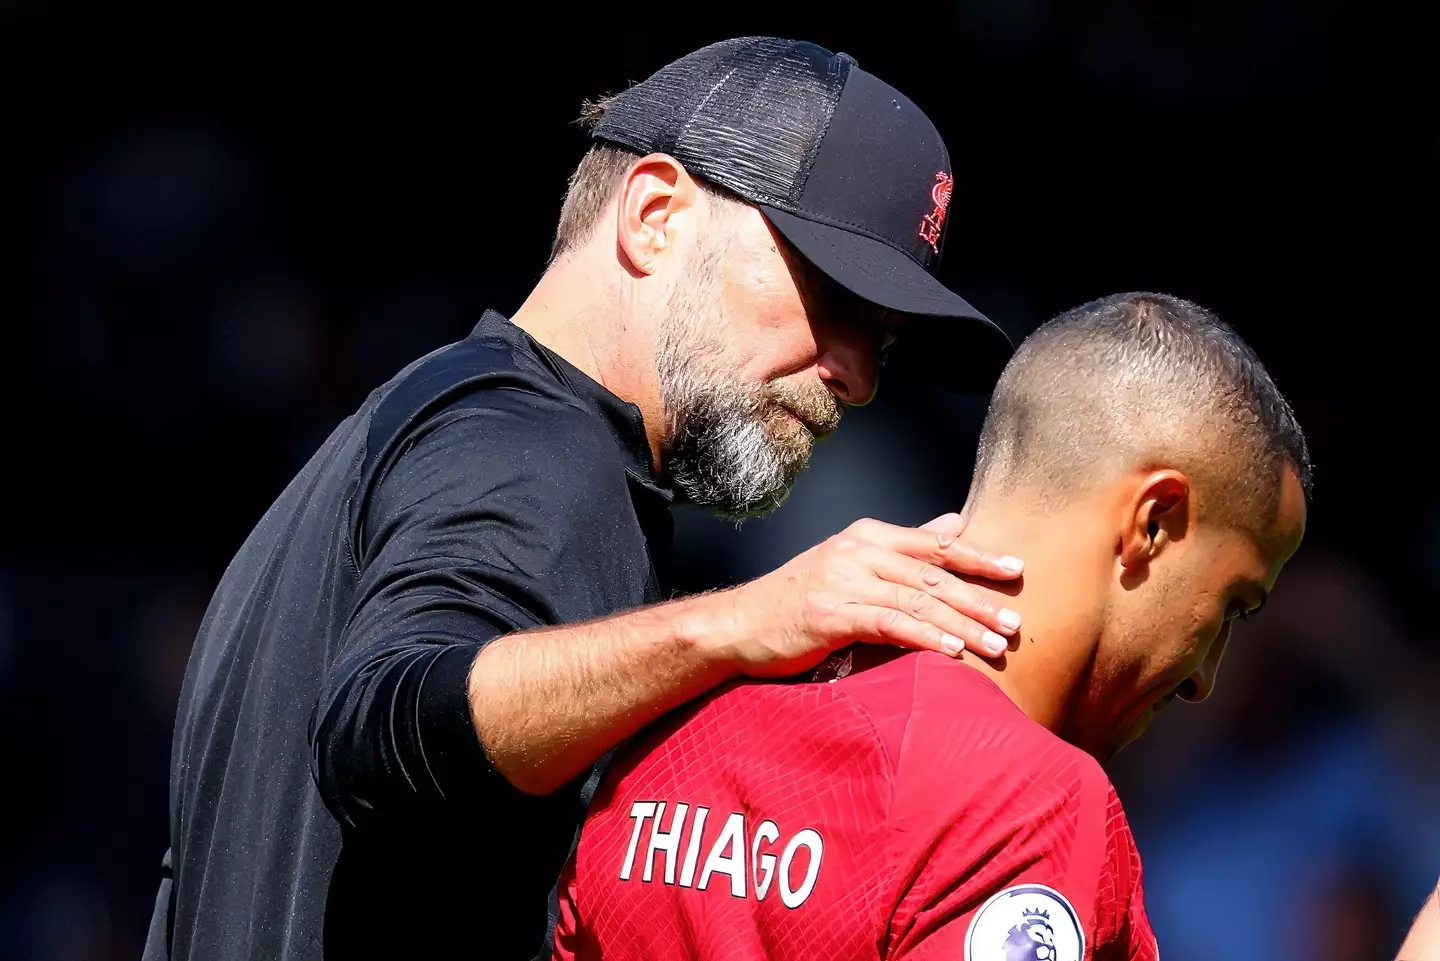 Klopp and Thiago during Saturday's clash with Fulham. (Image